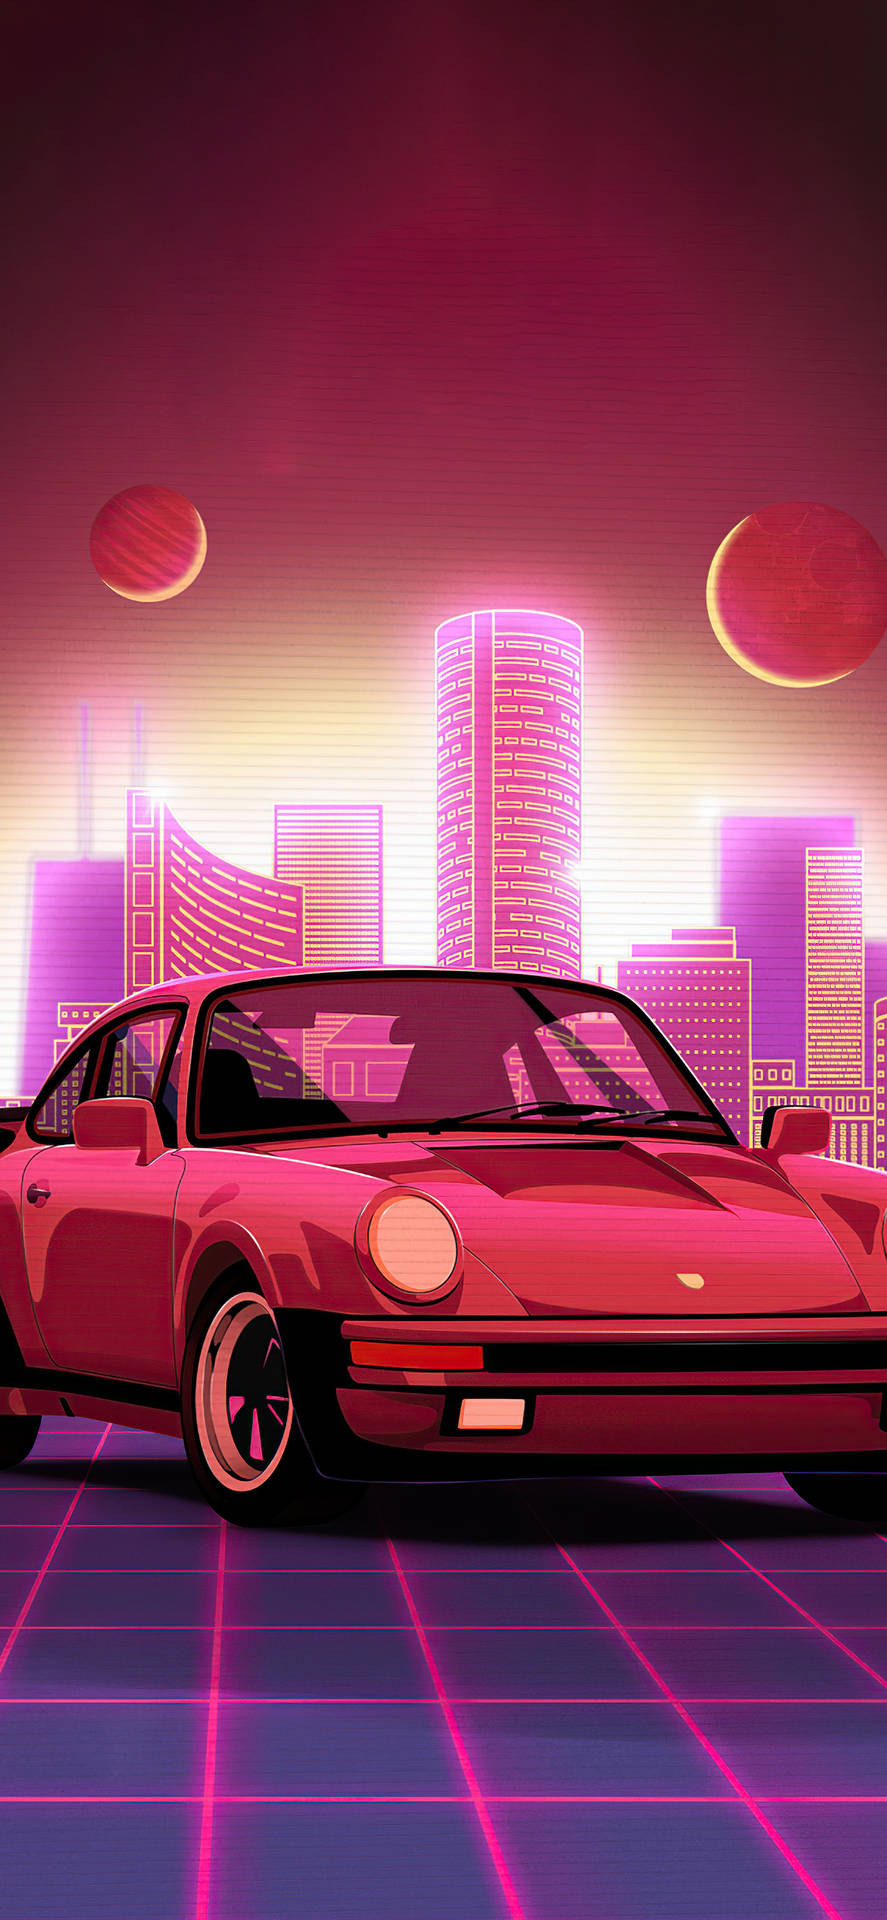 Iphone X Car Pink Vector Background